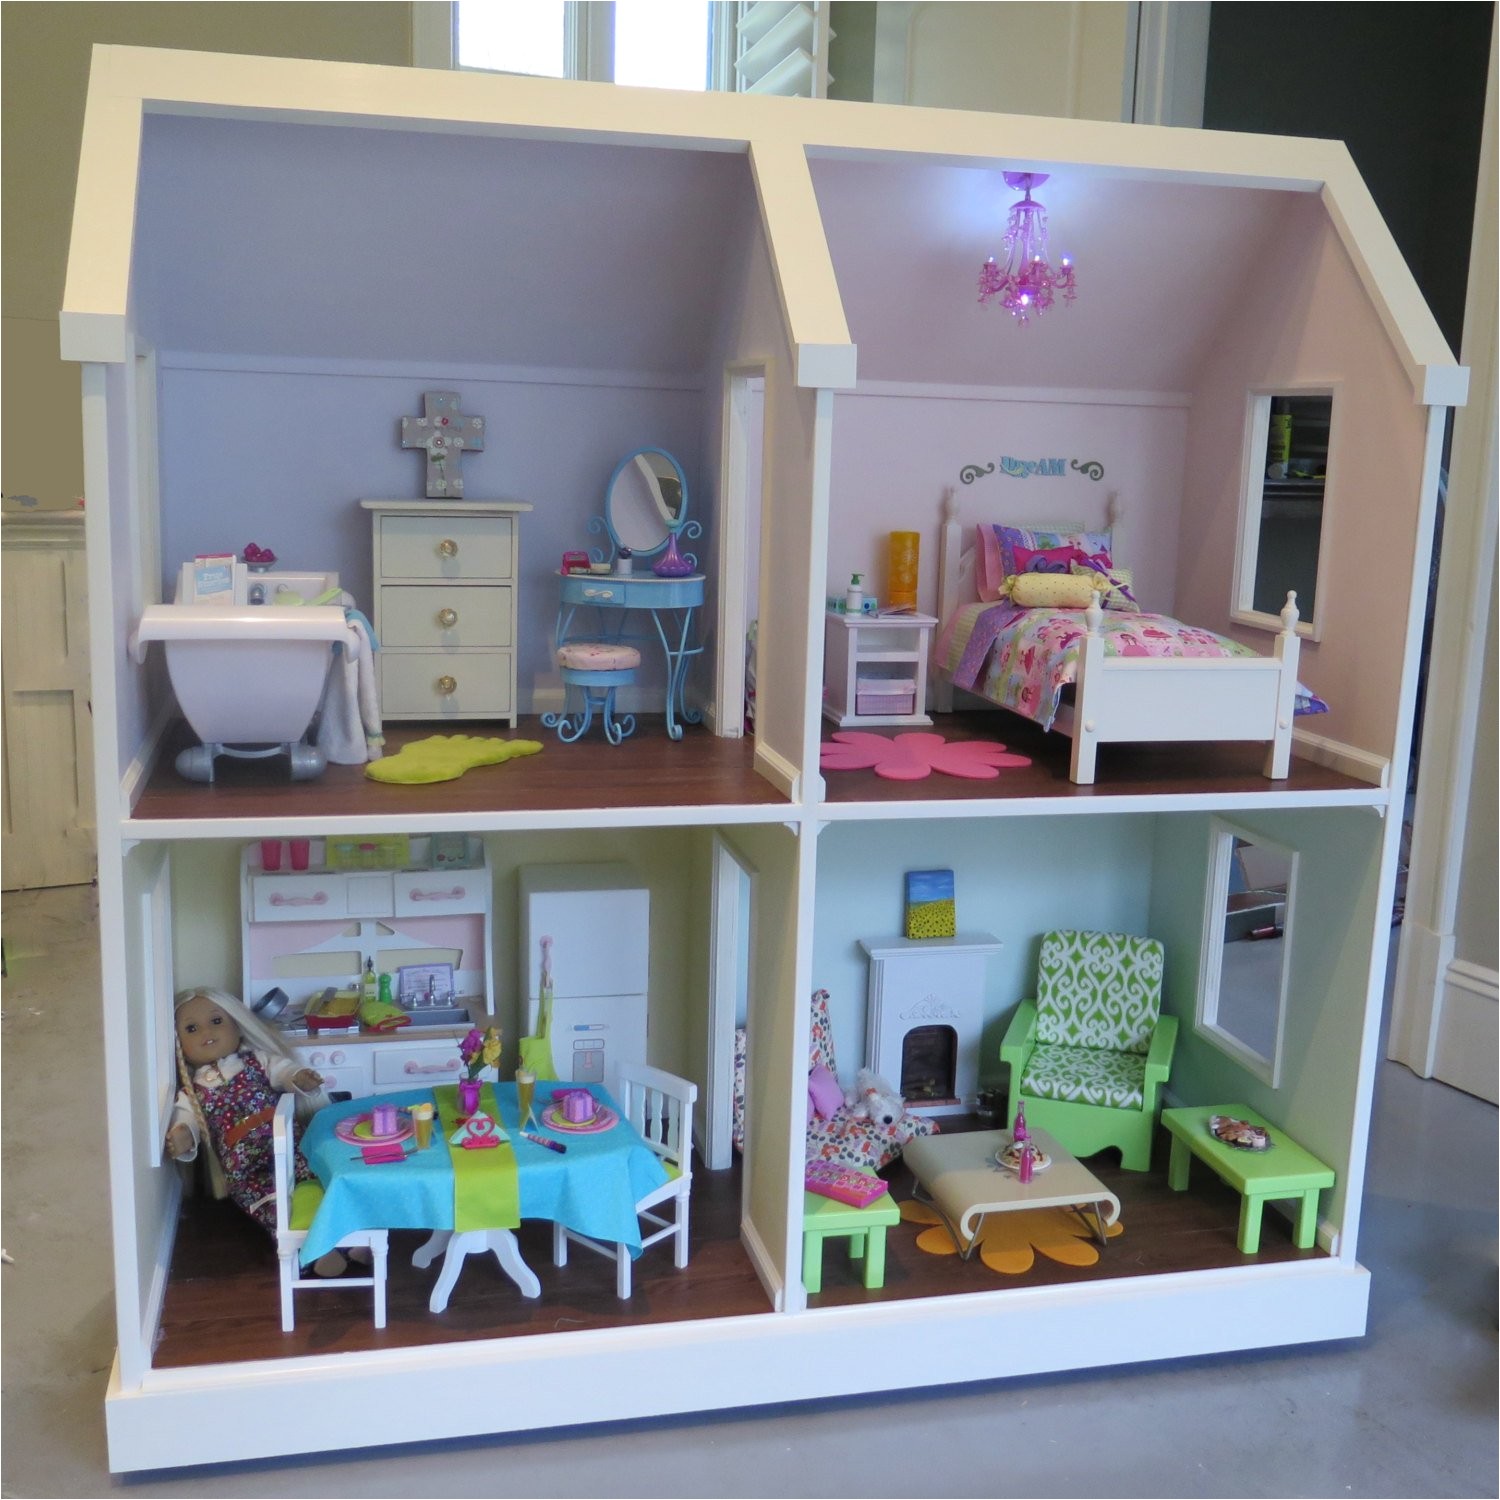 American Girl Doll House Plans Doll House Plans for American Girl or 18 Inch Dolls 4 Room